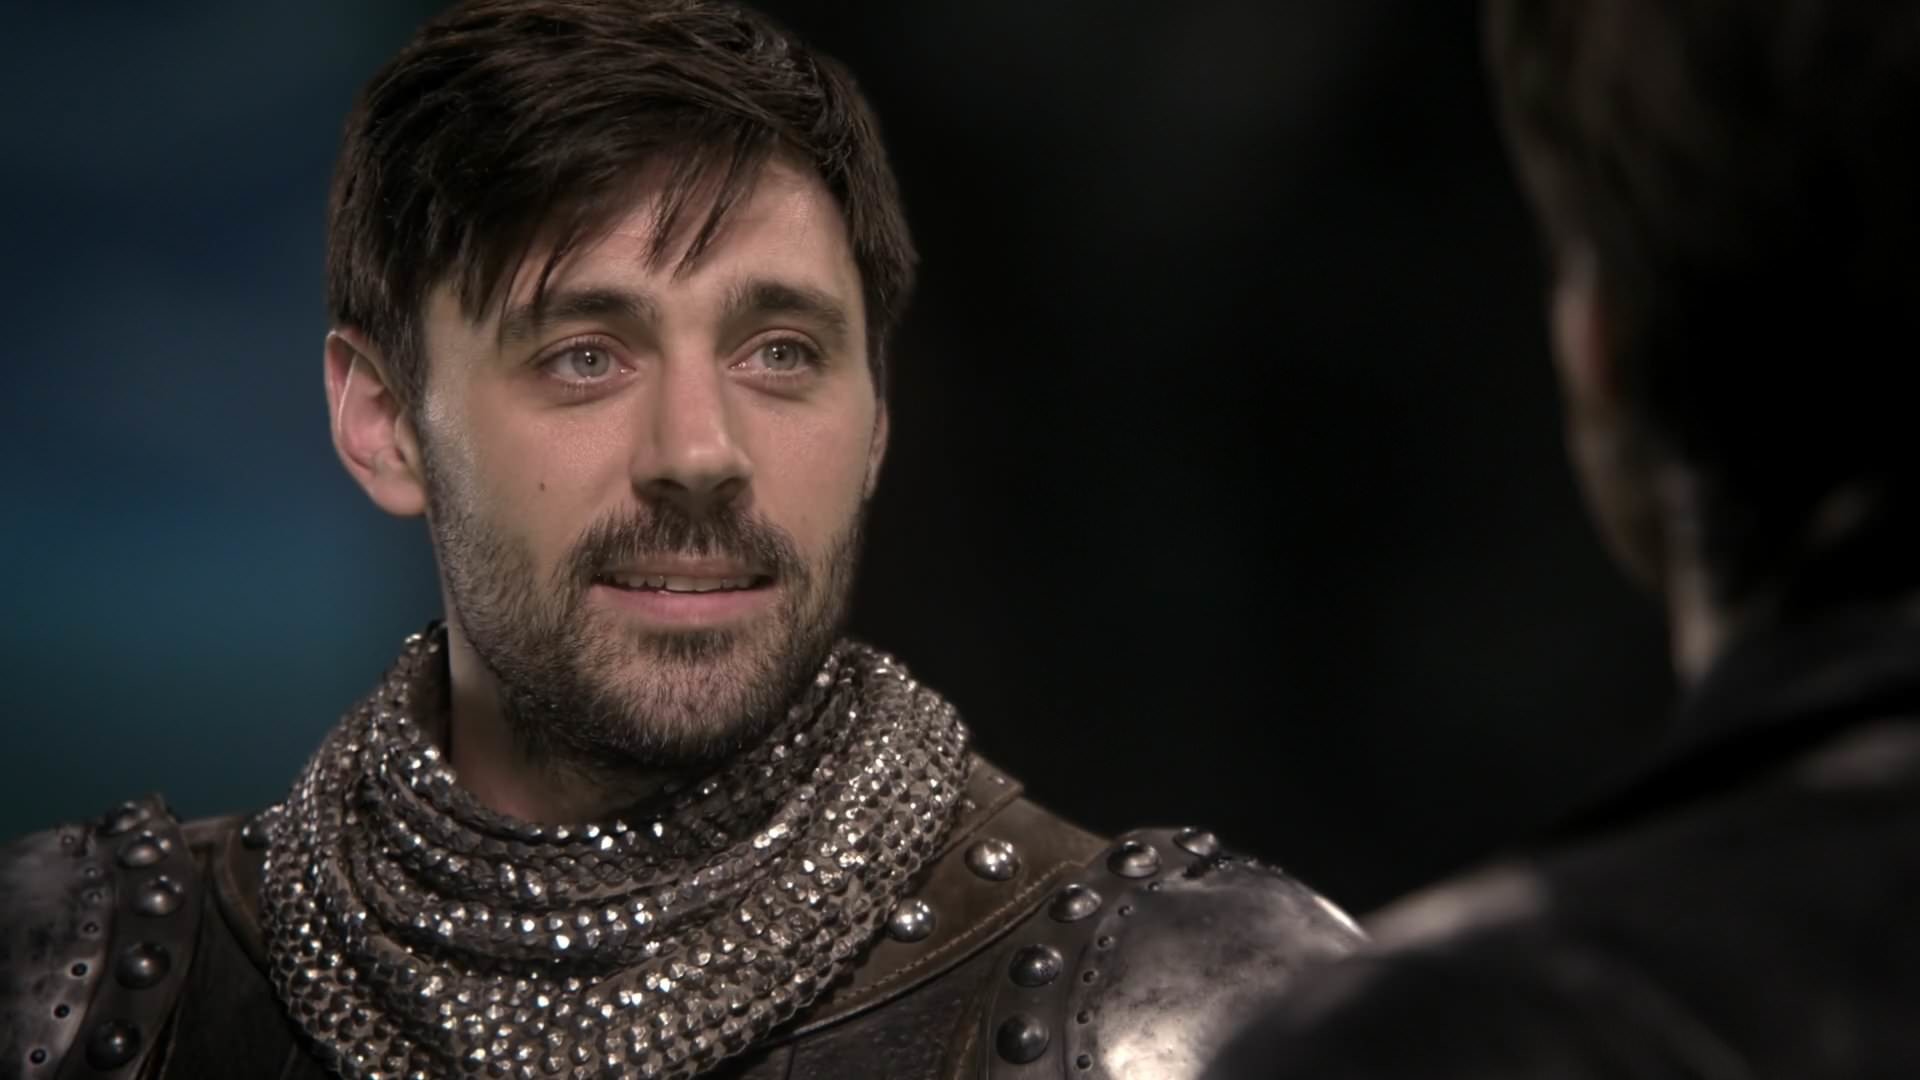 1920x1080 King Arthur (OUAT) images Ouat 5x21 HD wallpaper and background photos